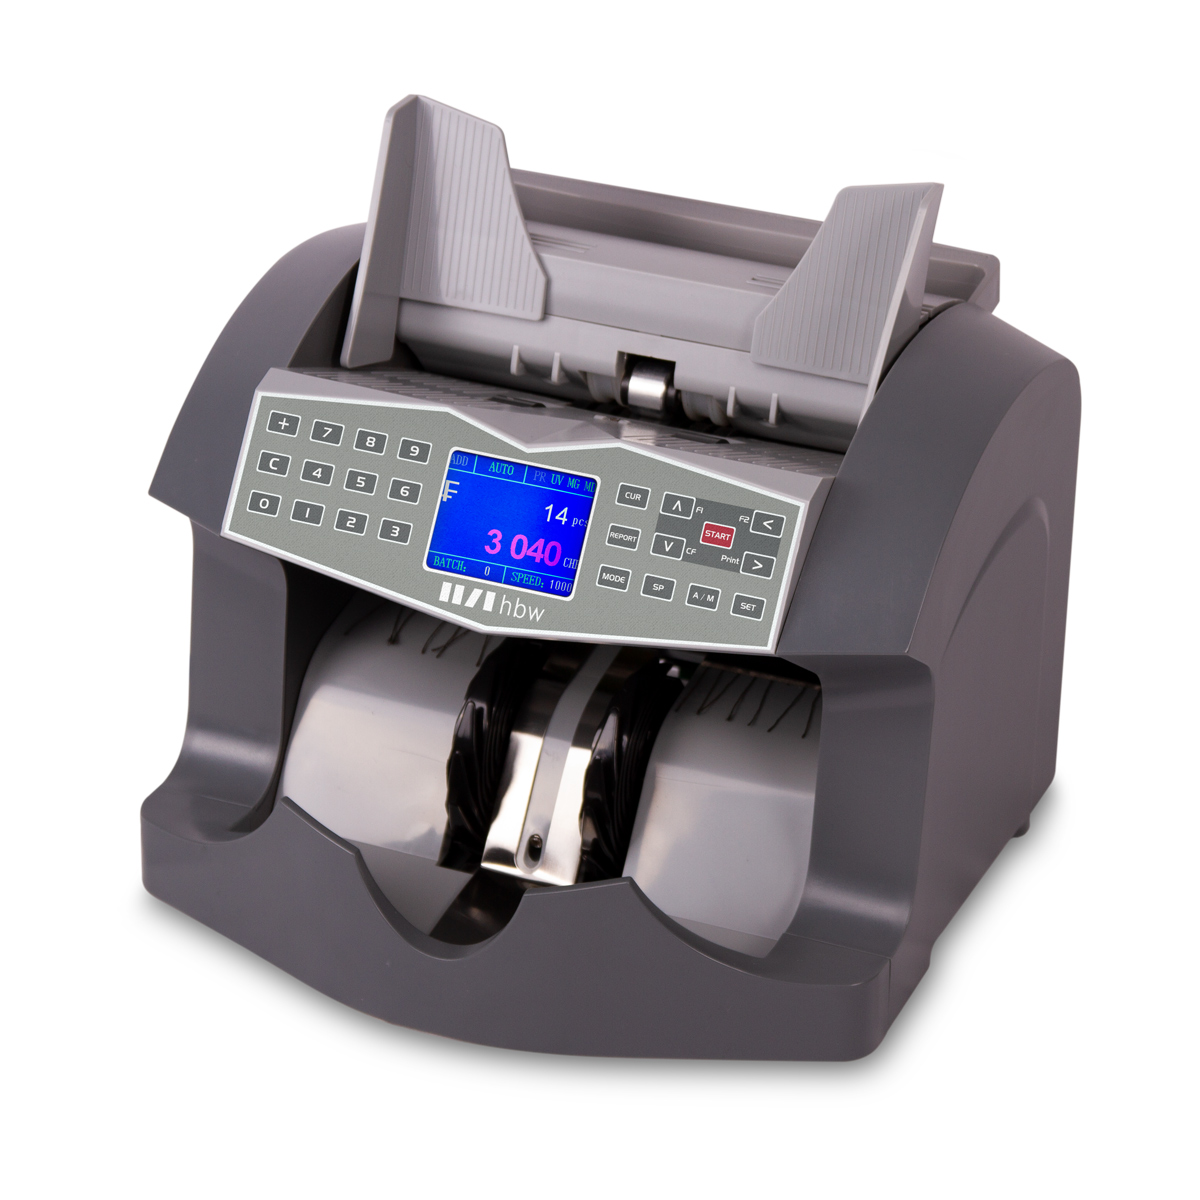 Banknote counters hbw VC 6040 Euro